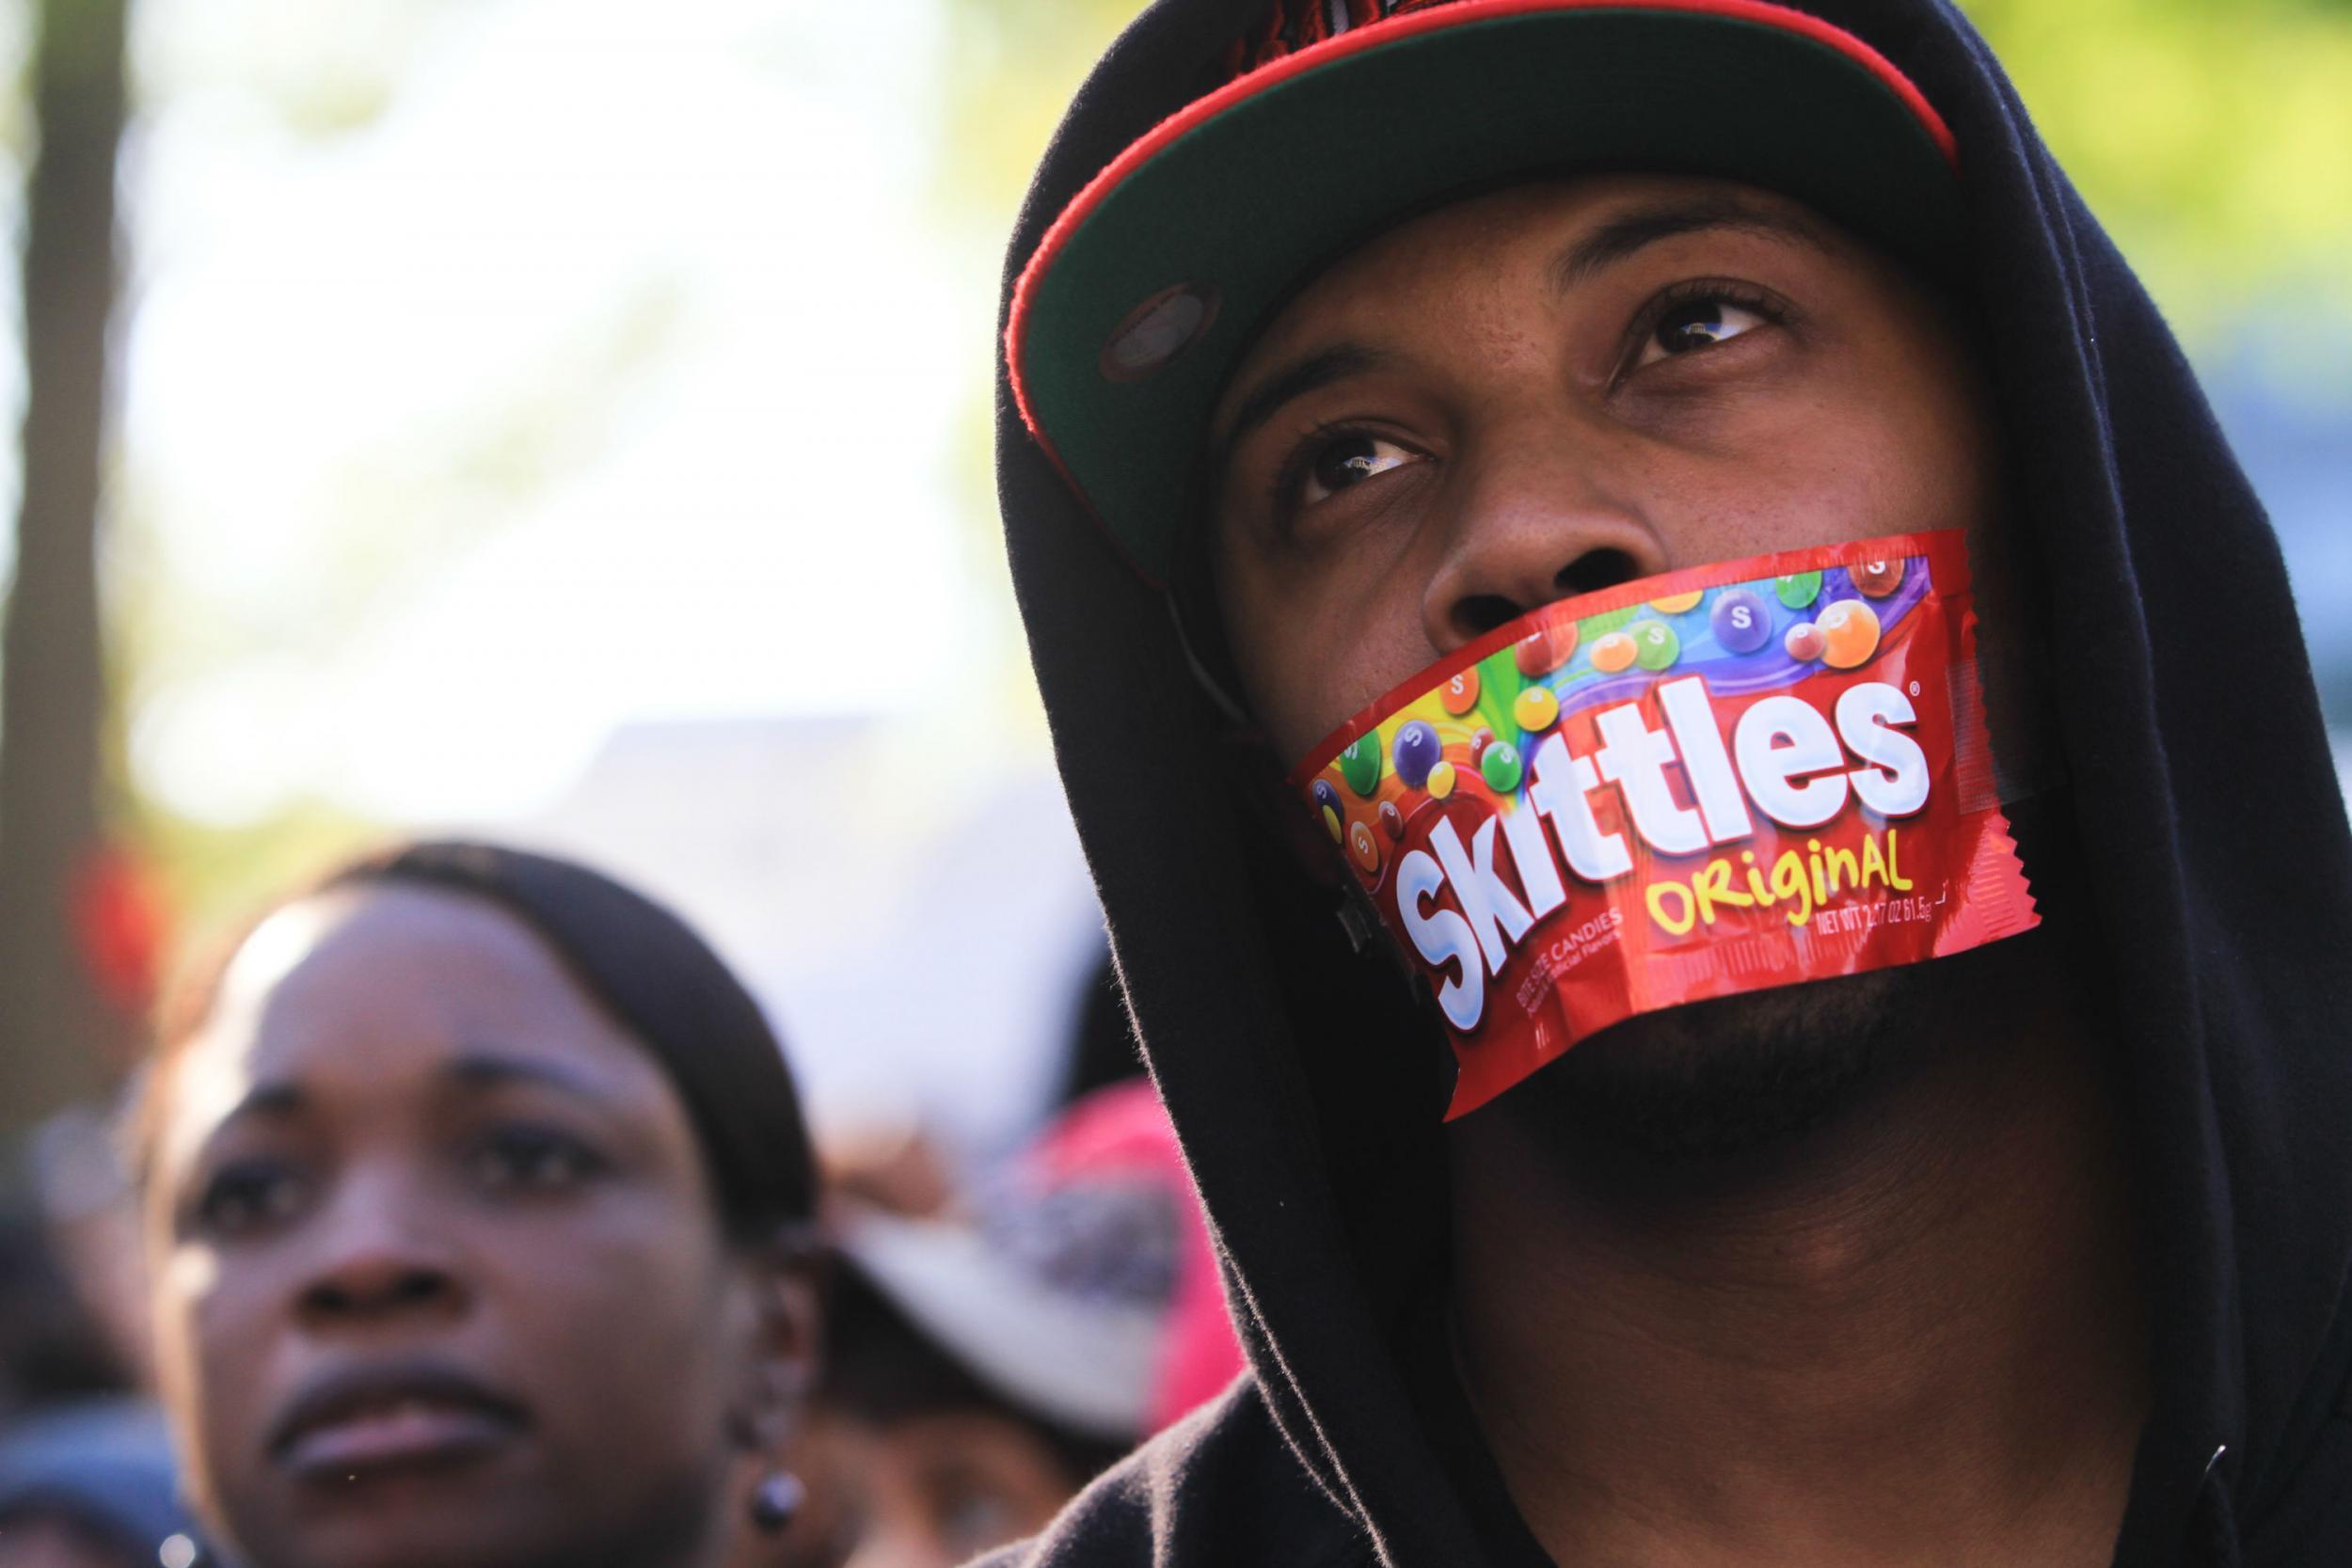 A protester plasters a packet over his mouth to express how Trayvon Martin was wrongfully killed